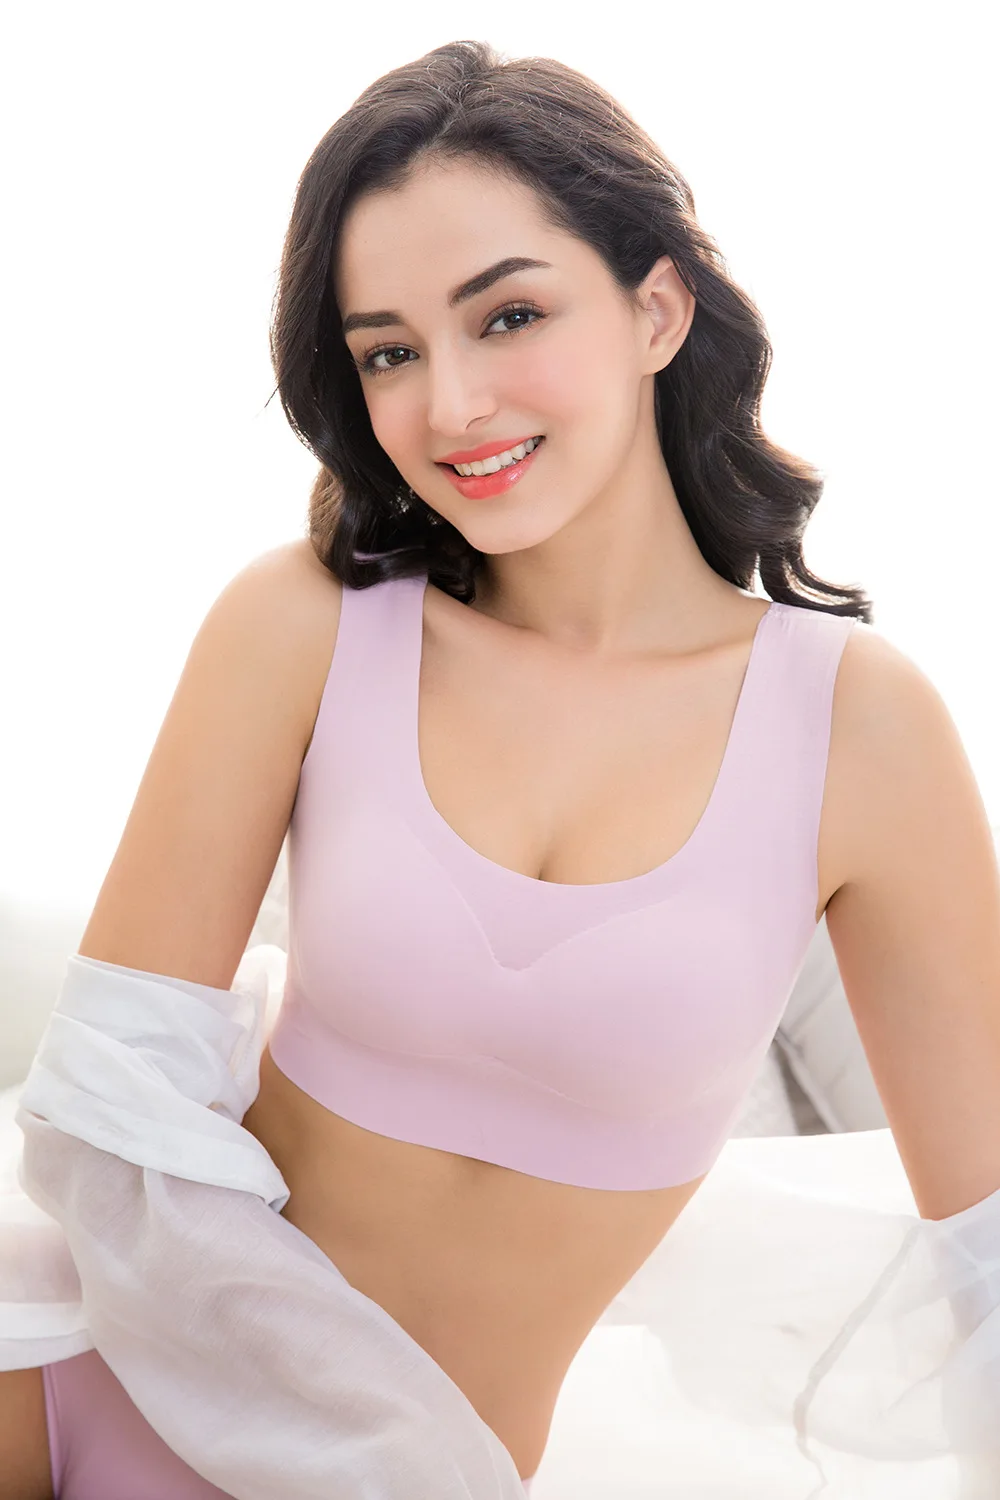 Bras Weseelove Japanese Solid Sleeping Bra Lace Beautiful Back Pushup Women  Plus Size Seamless Sports Vest Lingerie Femme M19 From Tengshe, $21.29